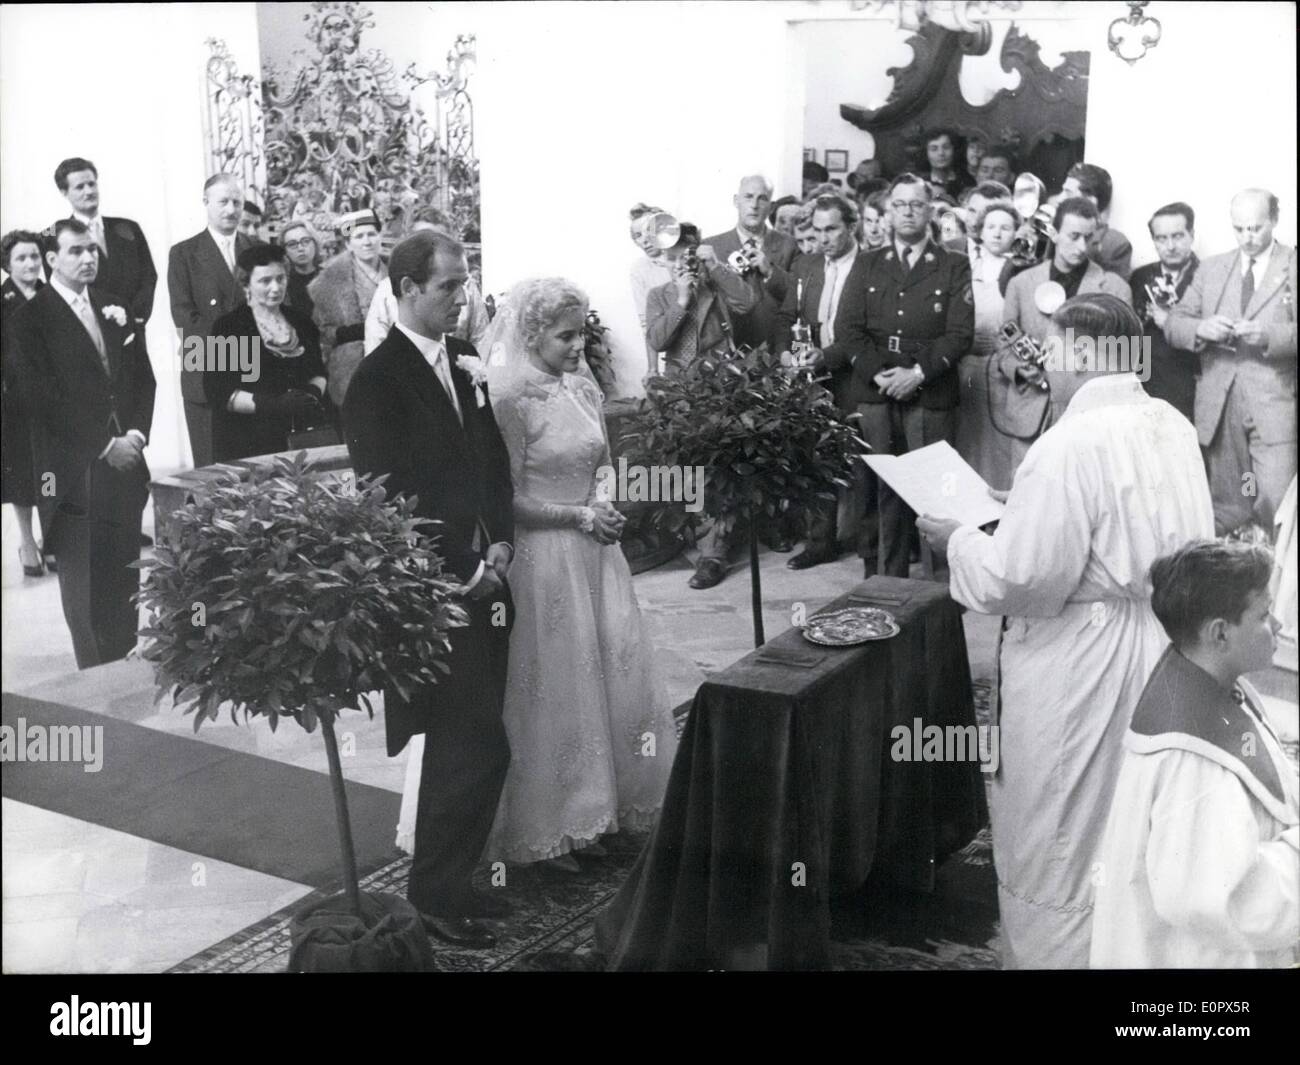 Apr. 04, 1957 - Movie-actress weds in the ''Wies'' Church: The Wedding of the Swiss-movie-actress Maria Schell and movie director Horst Hoechler took place in one of the most beautiful Churches of Upper- Bavaria, the charming rococo- building by Dominikus Zimmermann (1964-1754), near Stingaden. The wedding-ceremonial was performed by parson Johann Oberbauer. Picture Shows: Maria Schell and Horst Haechler infront of the altar. To the right- Parson Johann Oberbauer. In the background Bernhard Wicki, co-actor of Maria Schell in the movie ''The last bridge'', next to him- Maria Schell's mother Stock Photo